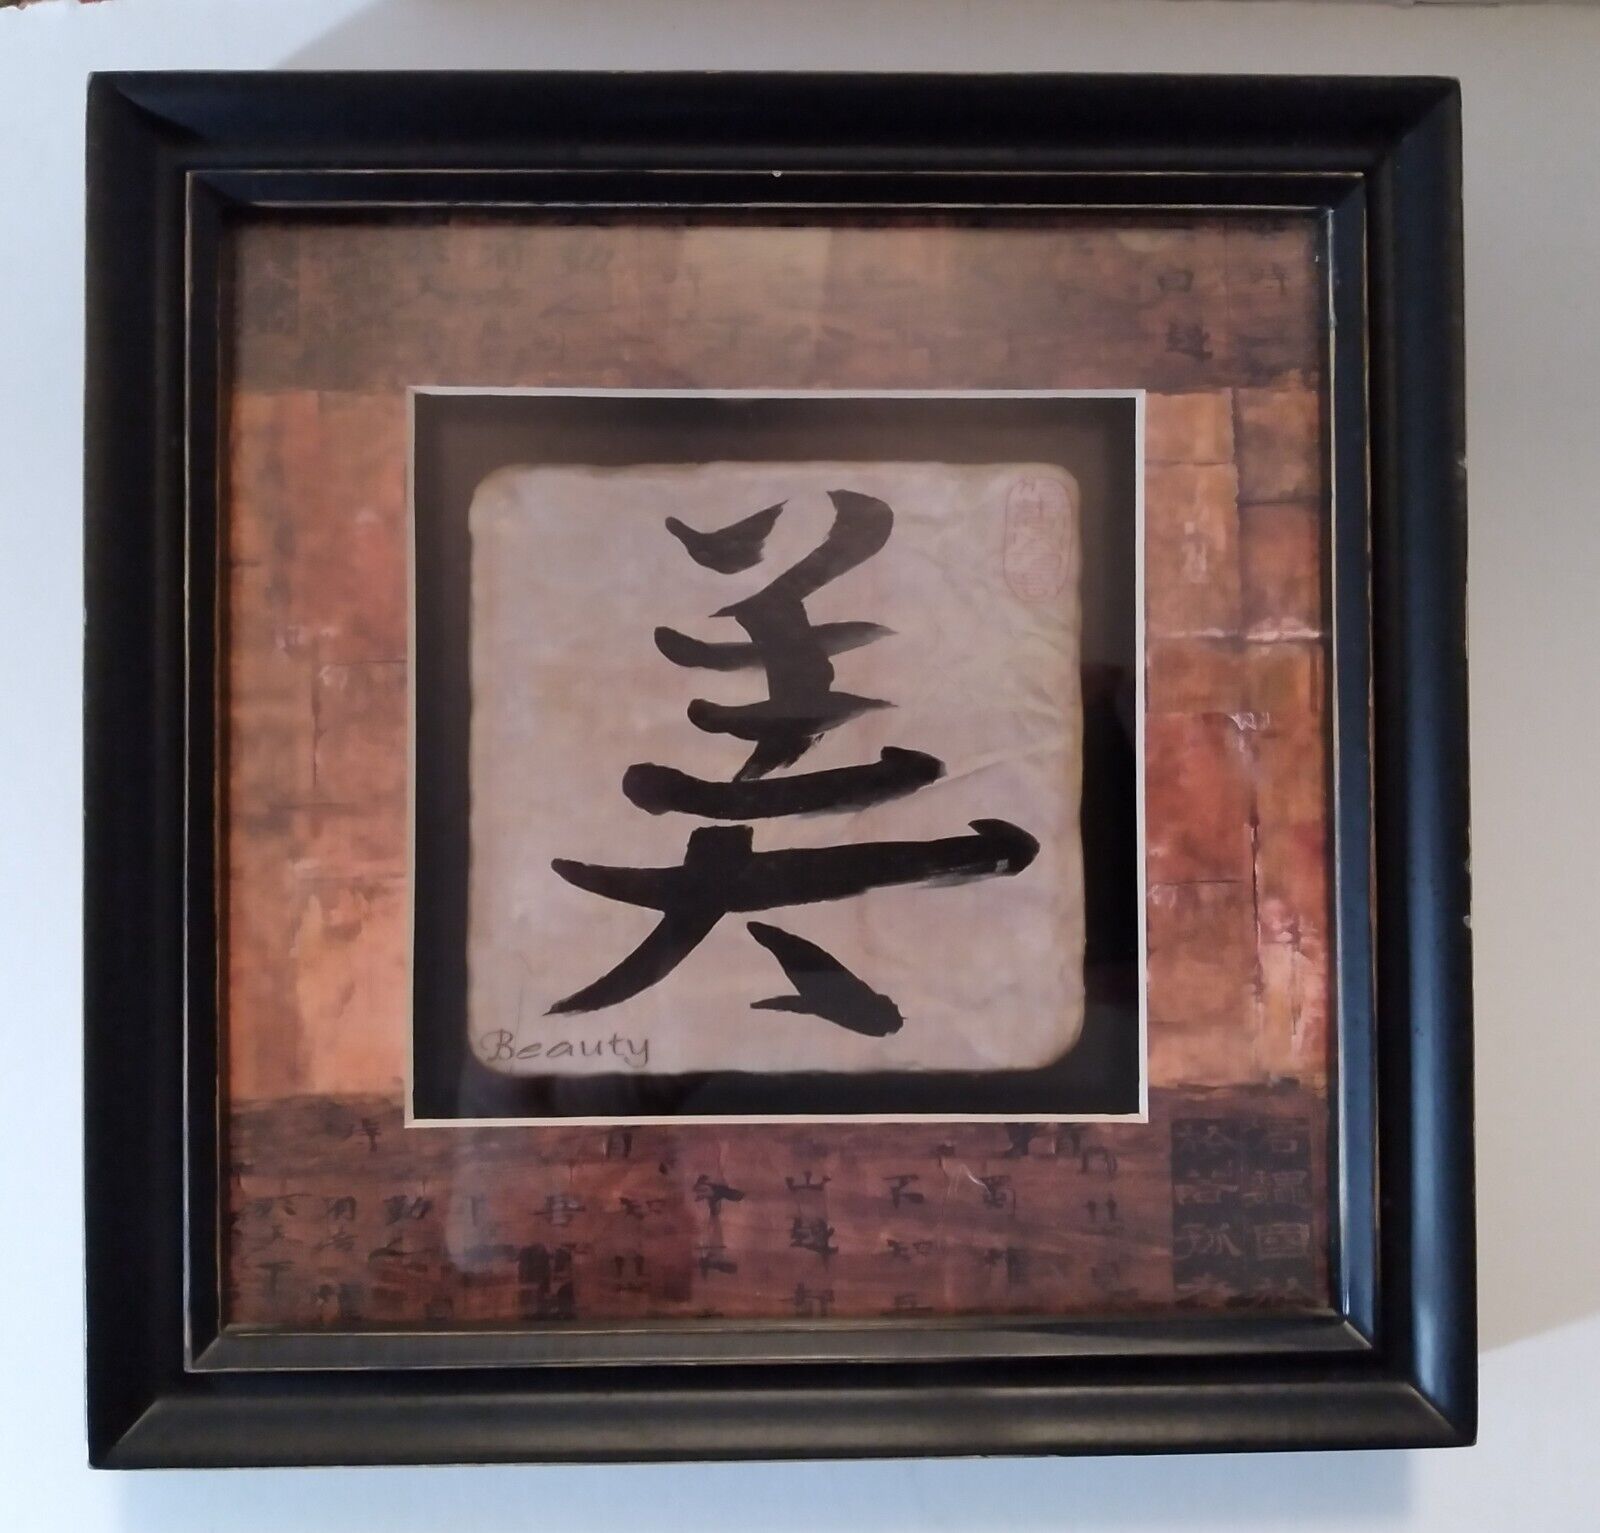 Professional Chinese Calligraphy Framed Art Beauty Hand Painted on Ceramic